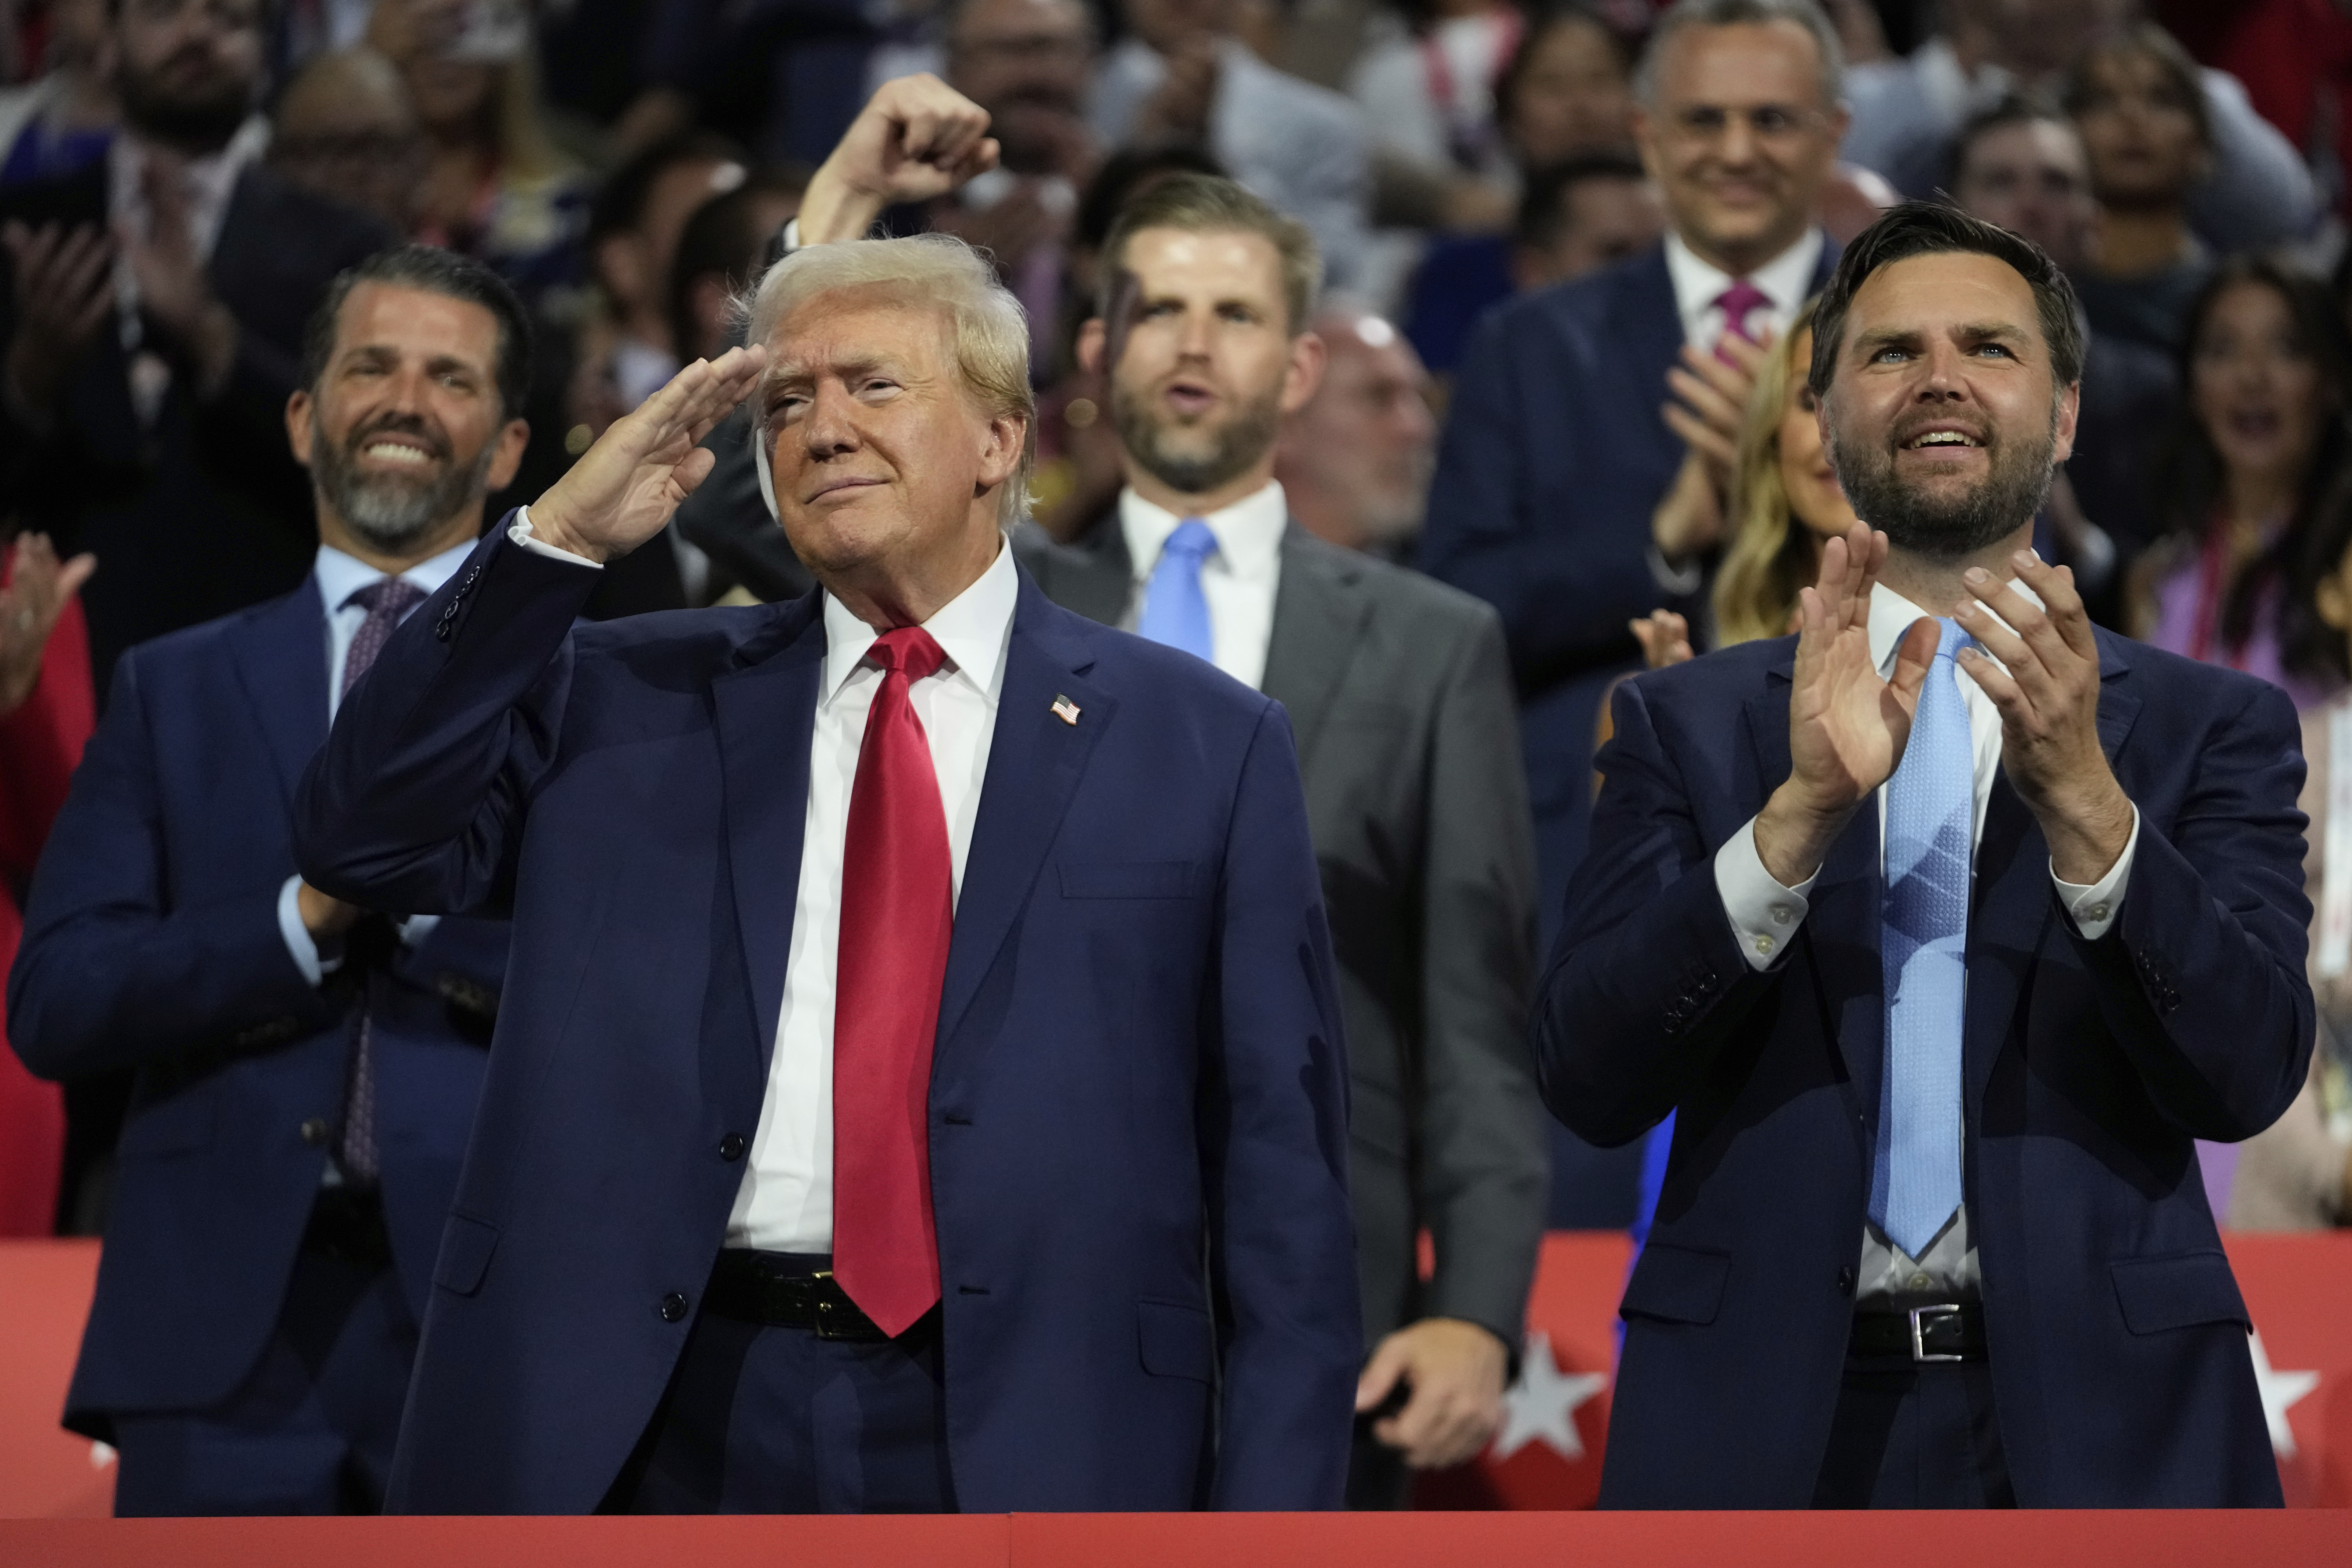 Republican presidential candidate and former President Donald Trump appears with vice presidential candidate JD Vance, R-Ohio, during the Republican National Convention on Monday, July 15, 2024, in Milwaukee. Photo credit: Paul Sancya, The Associated Press